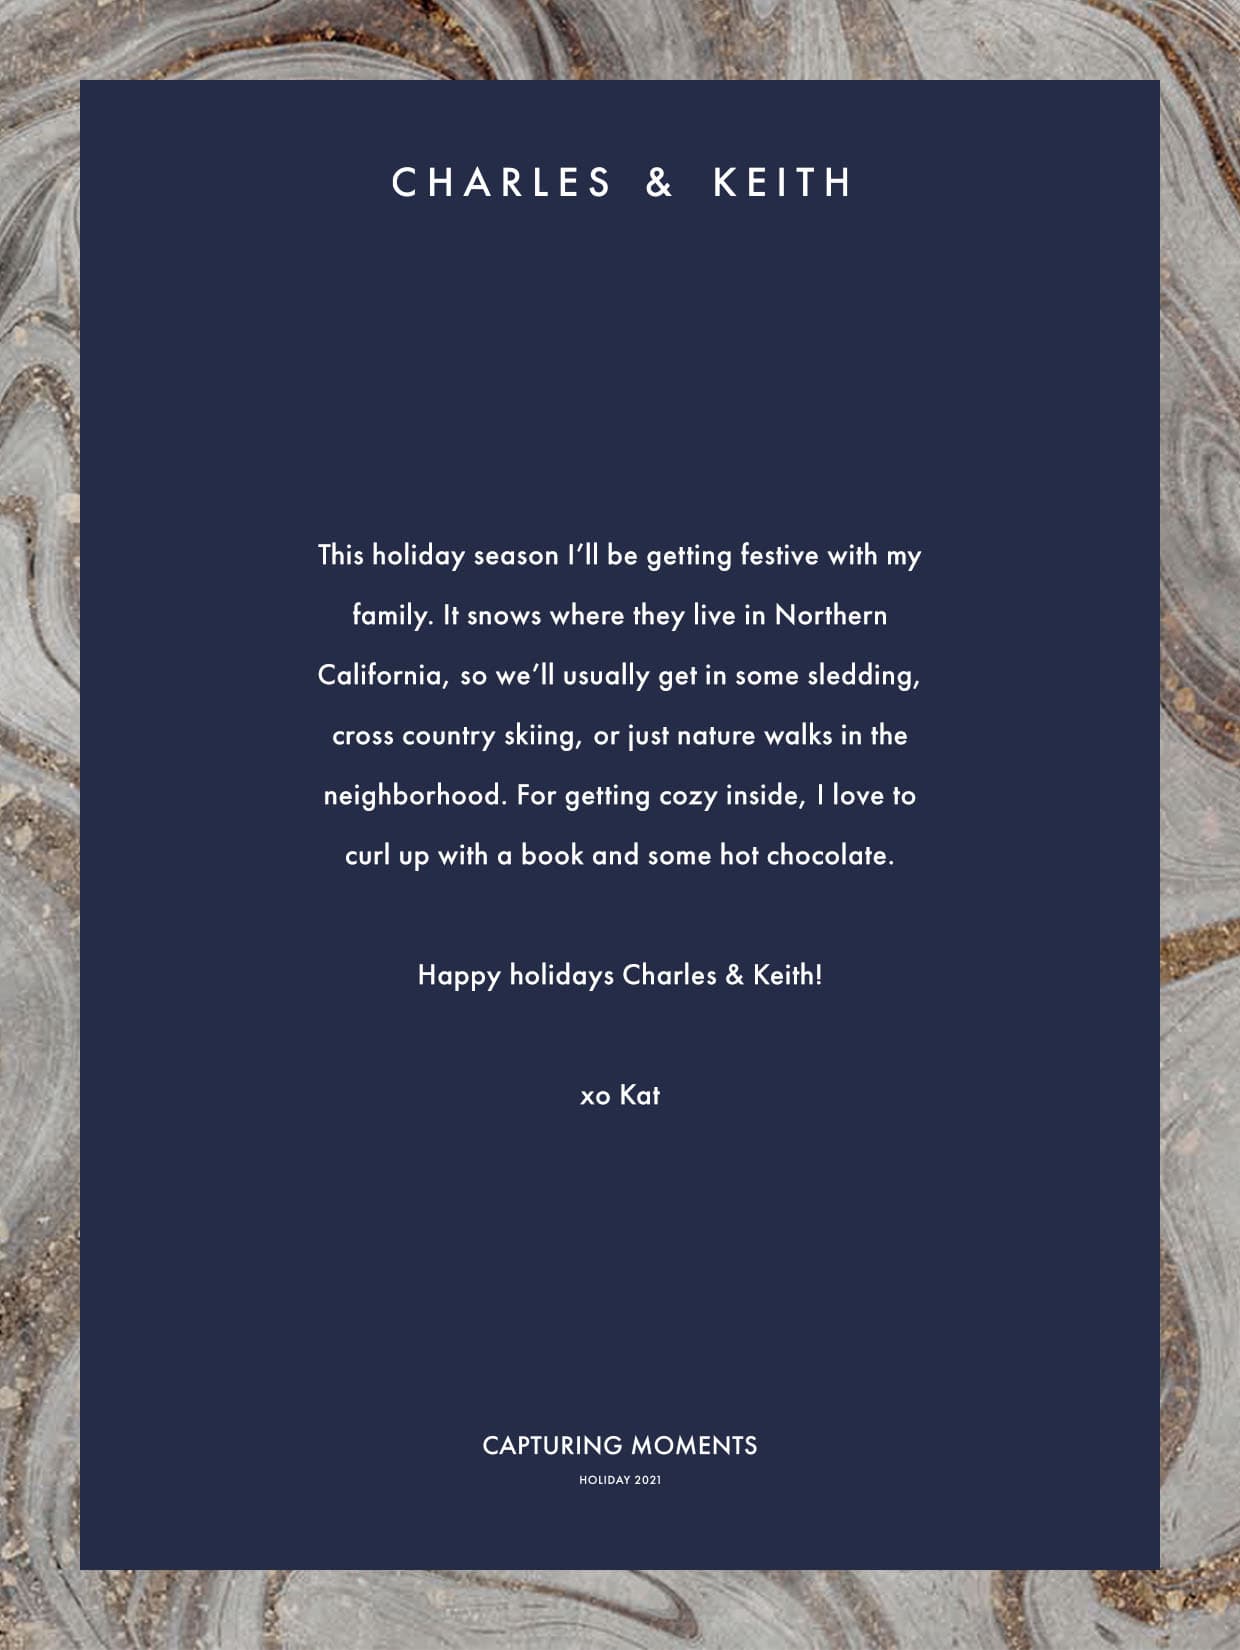 charles keith holiday blog kol wishes 08 content